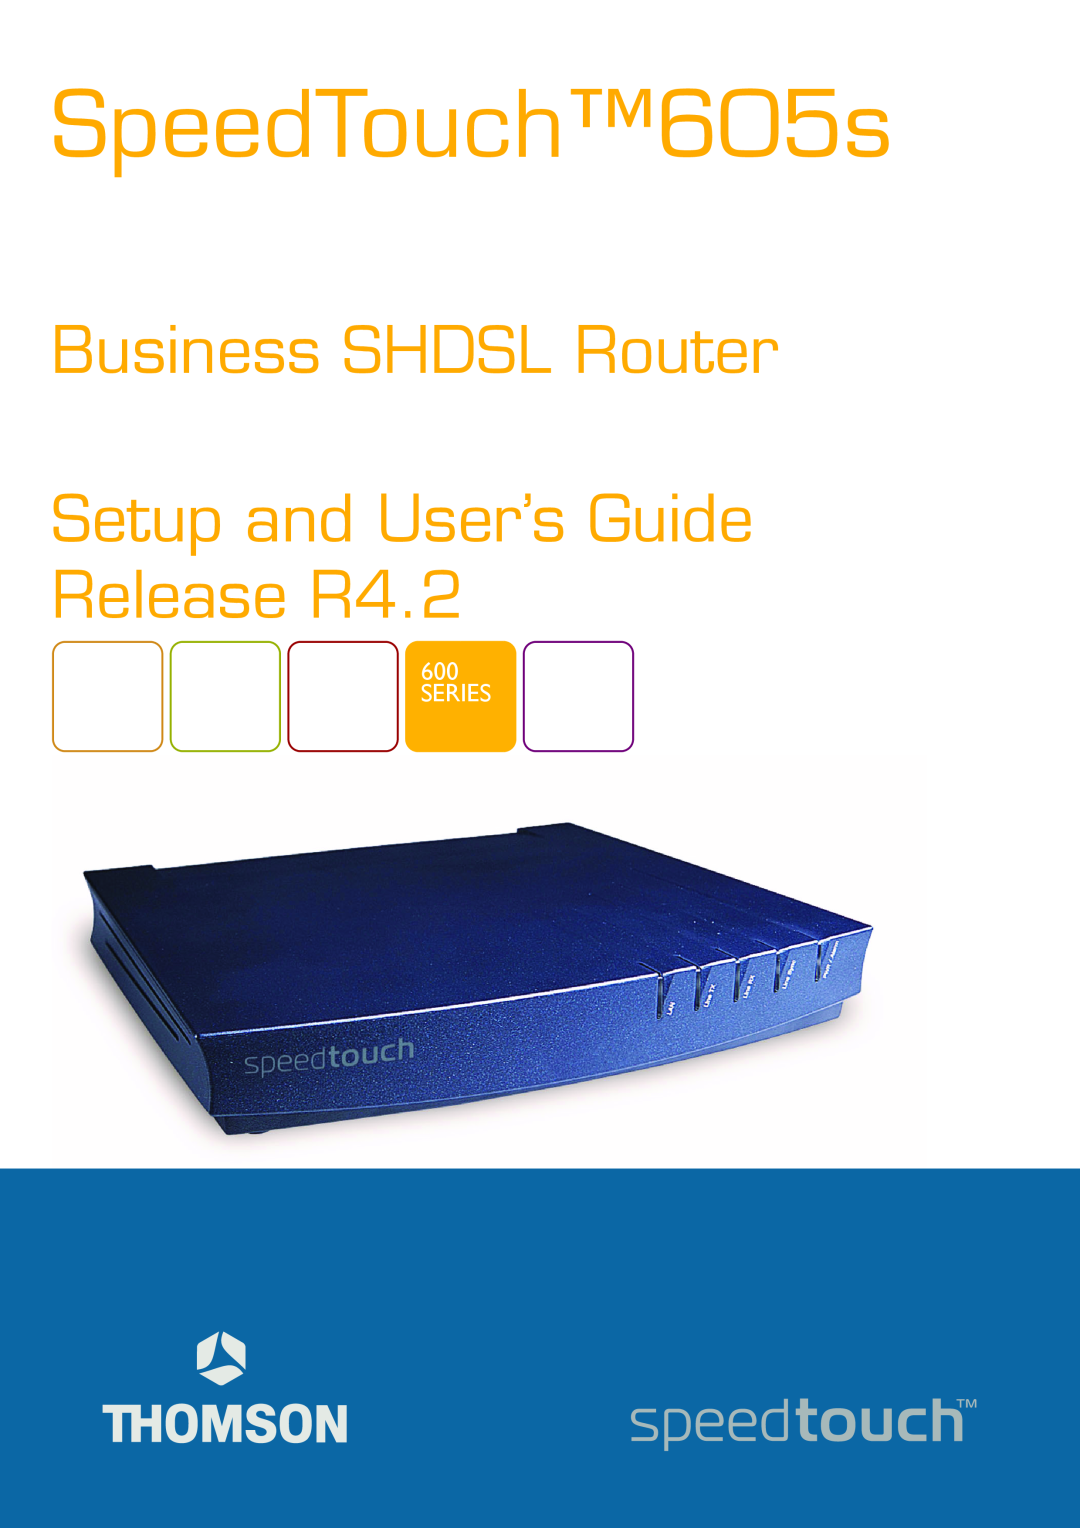 Technicolor - Thomson 605S manual Series, SpeedTouch605s, Business SHDSL Router Setup and User’s Guide Release R4.2 